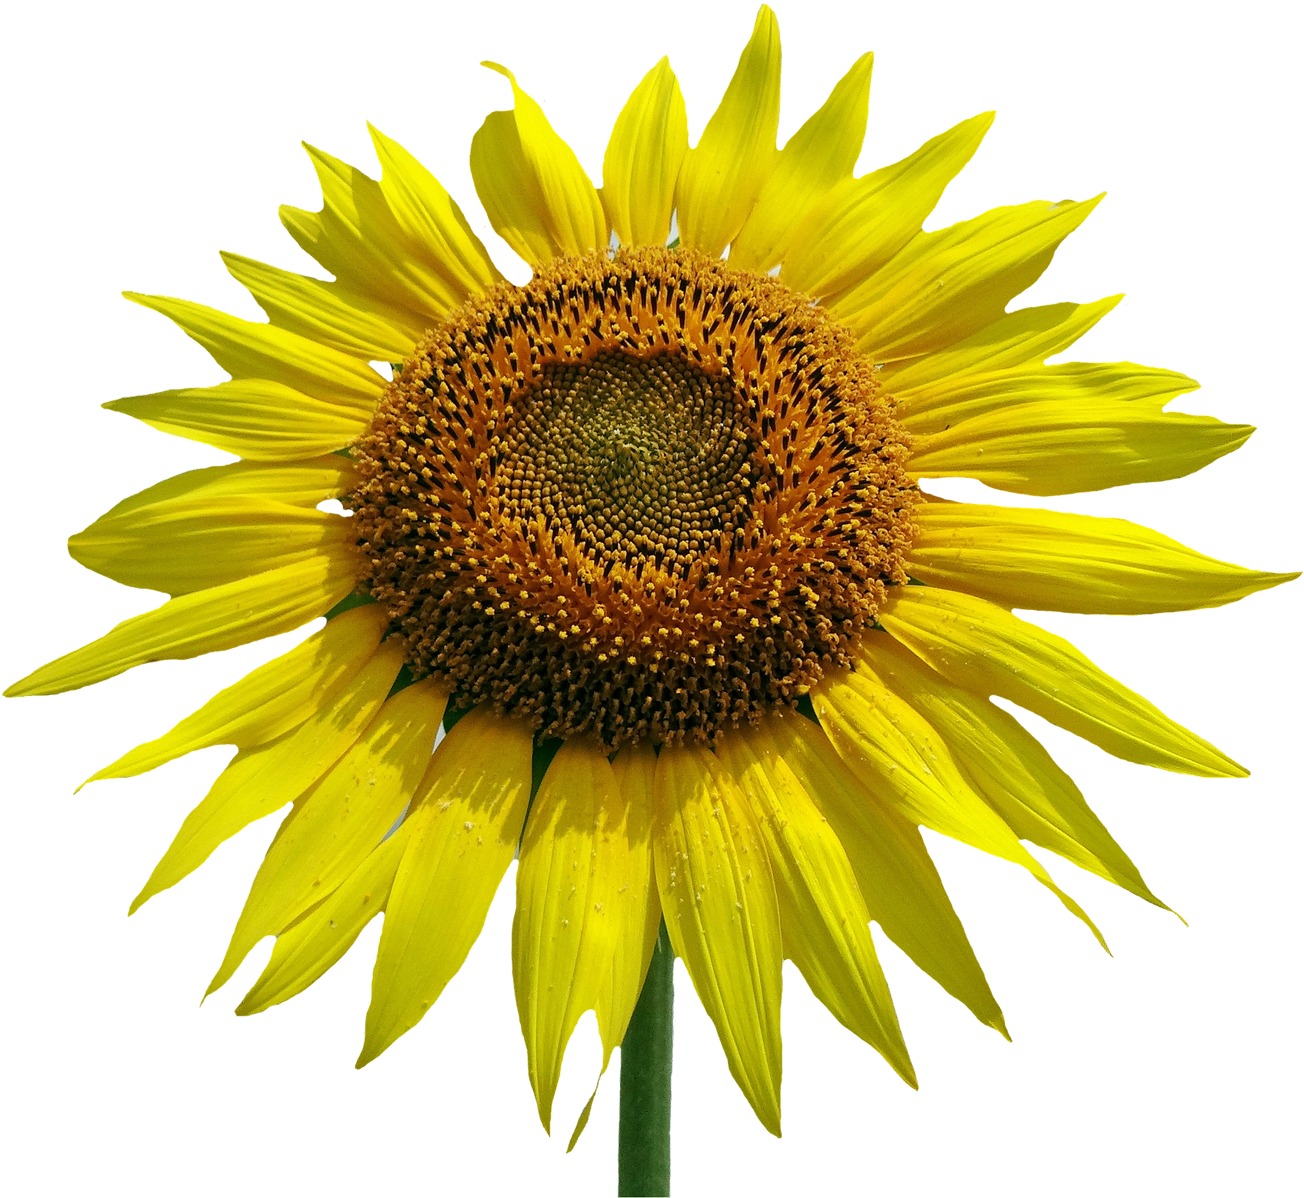 Sunflower Flower Png Image - Portable Network Graphics (1400x1268)